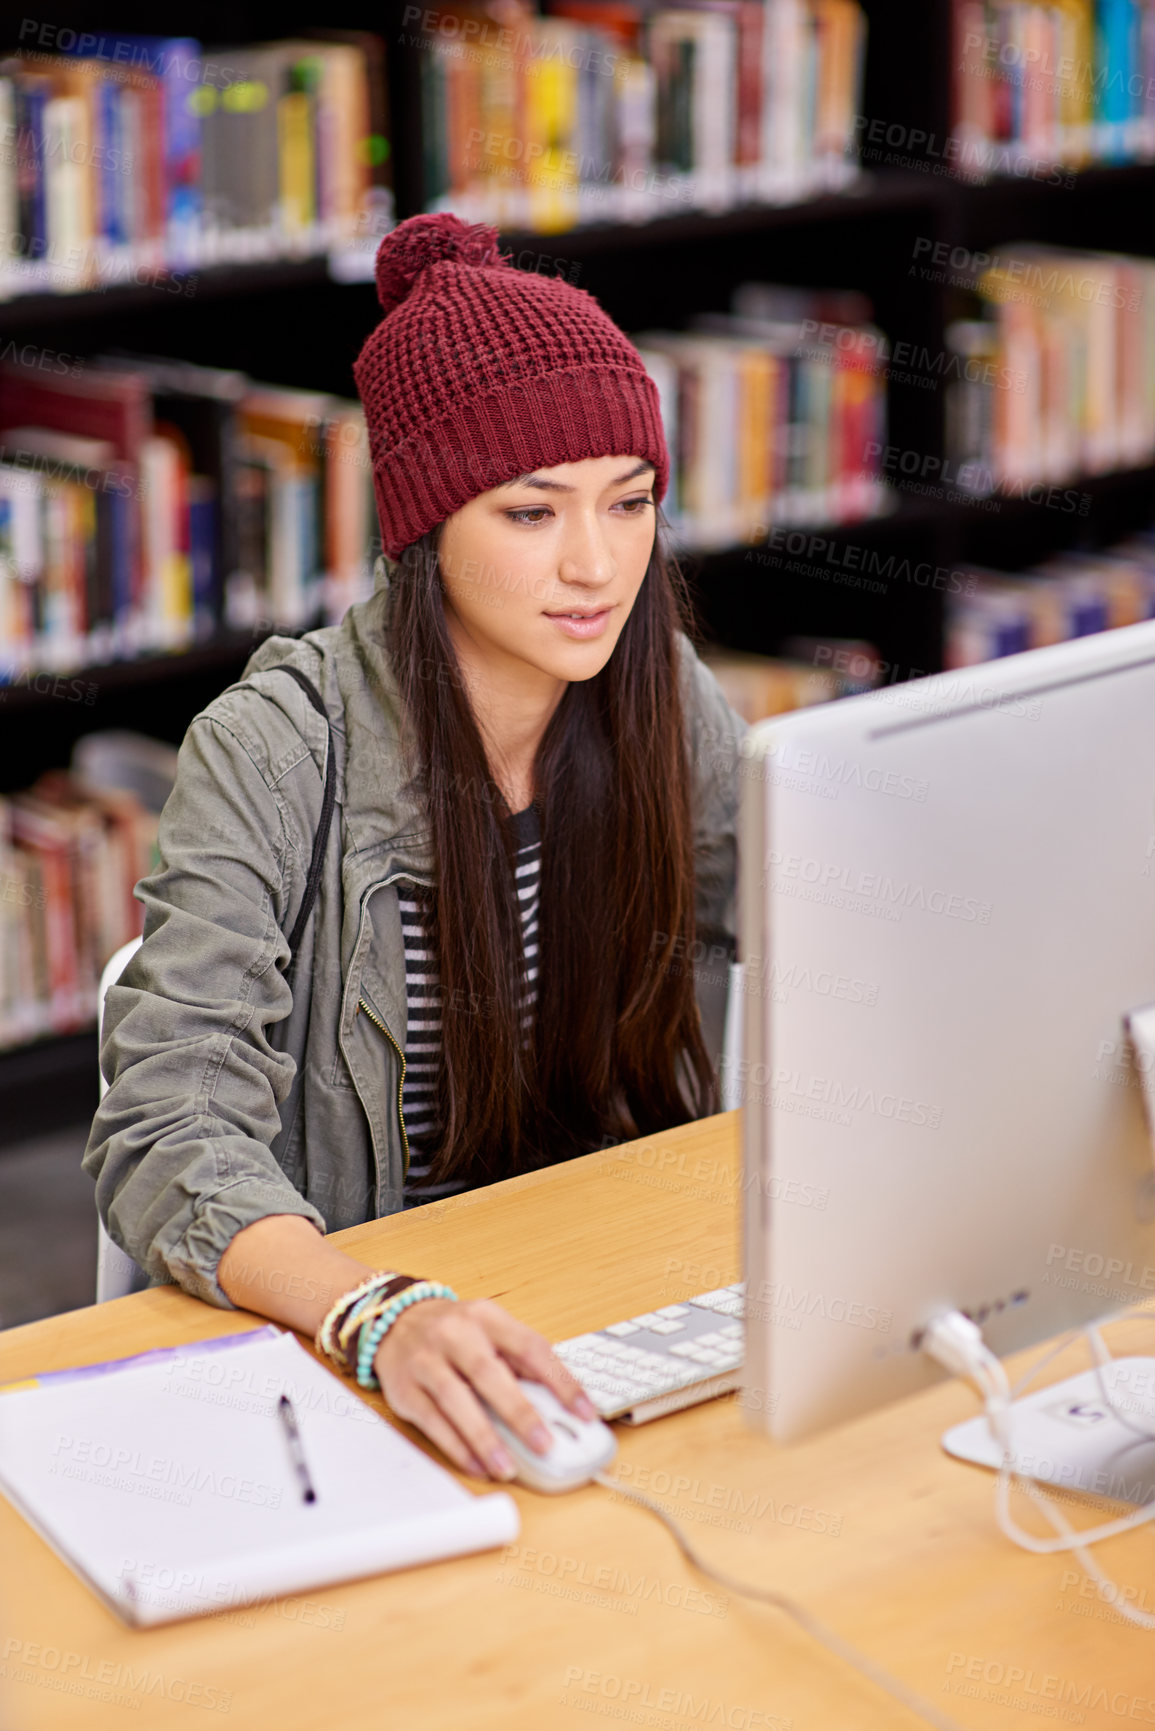 Buy stock photo Shot of a female student working on a computer in a university library